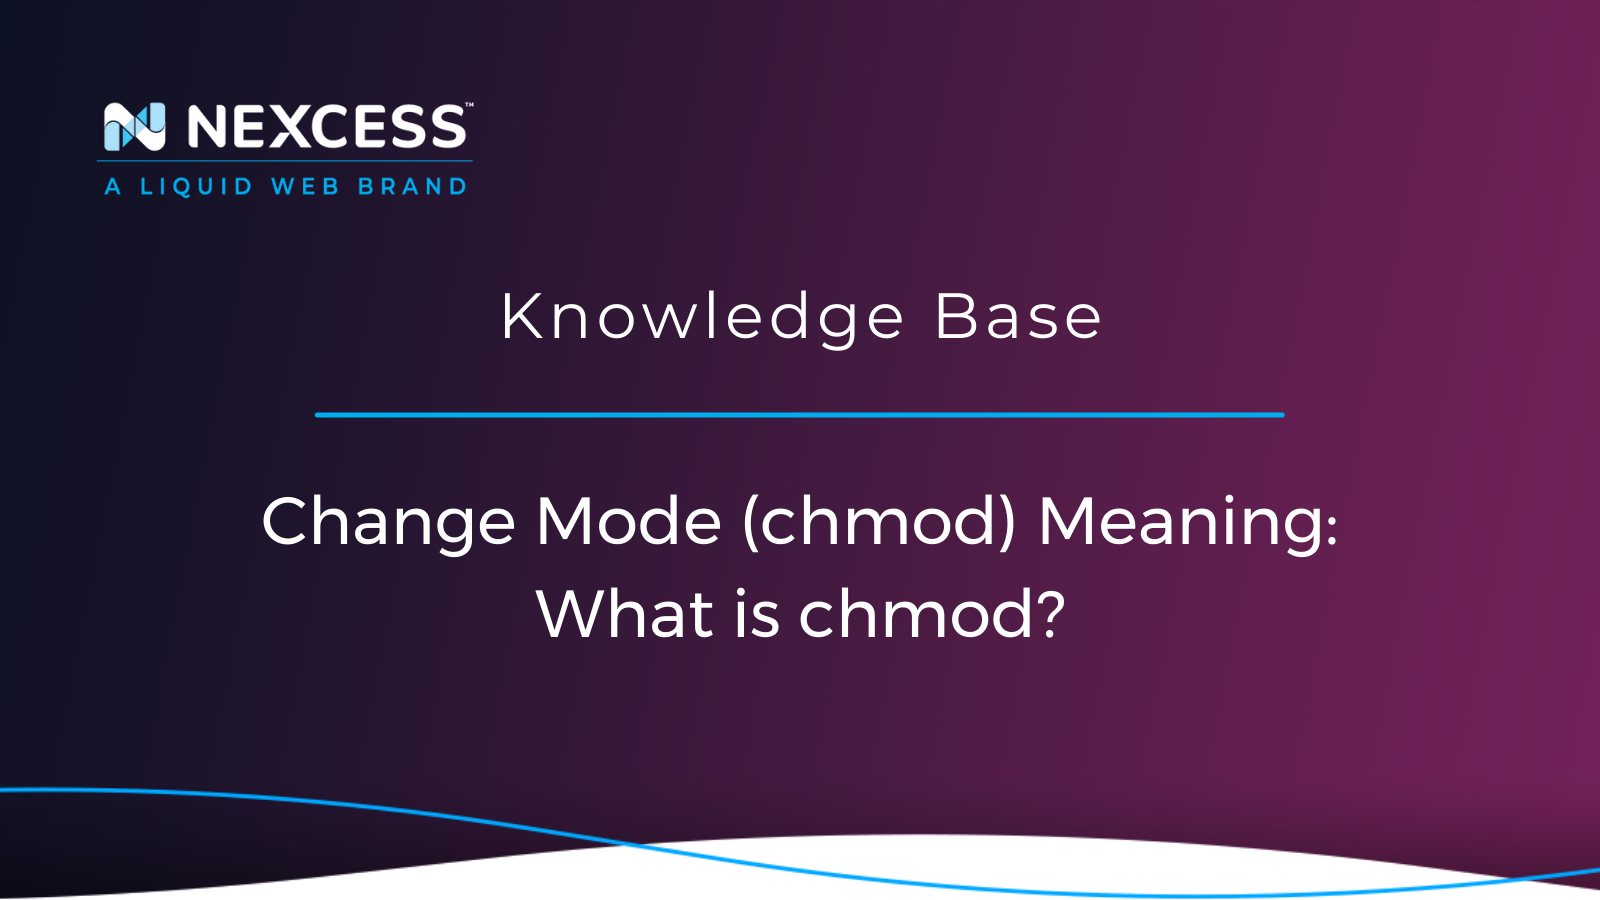 Change Mode (chmod) Meaning: What is chmod?